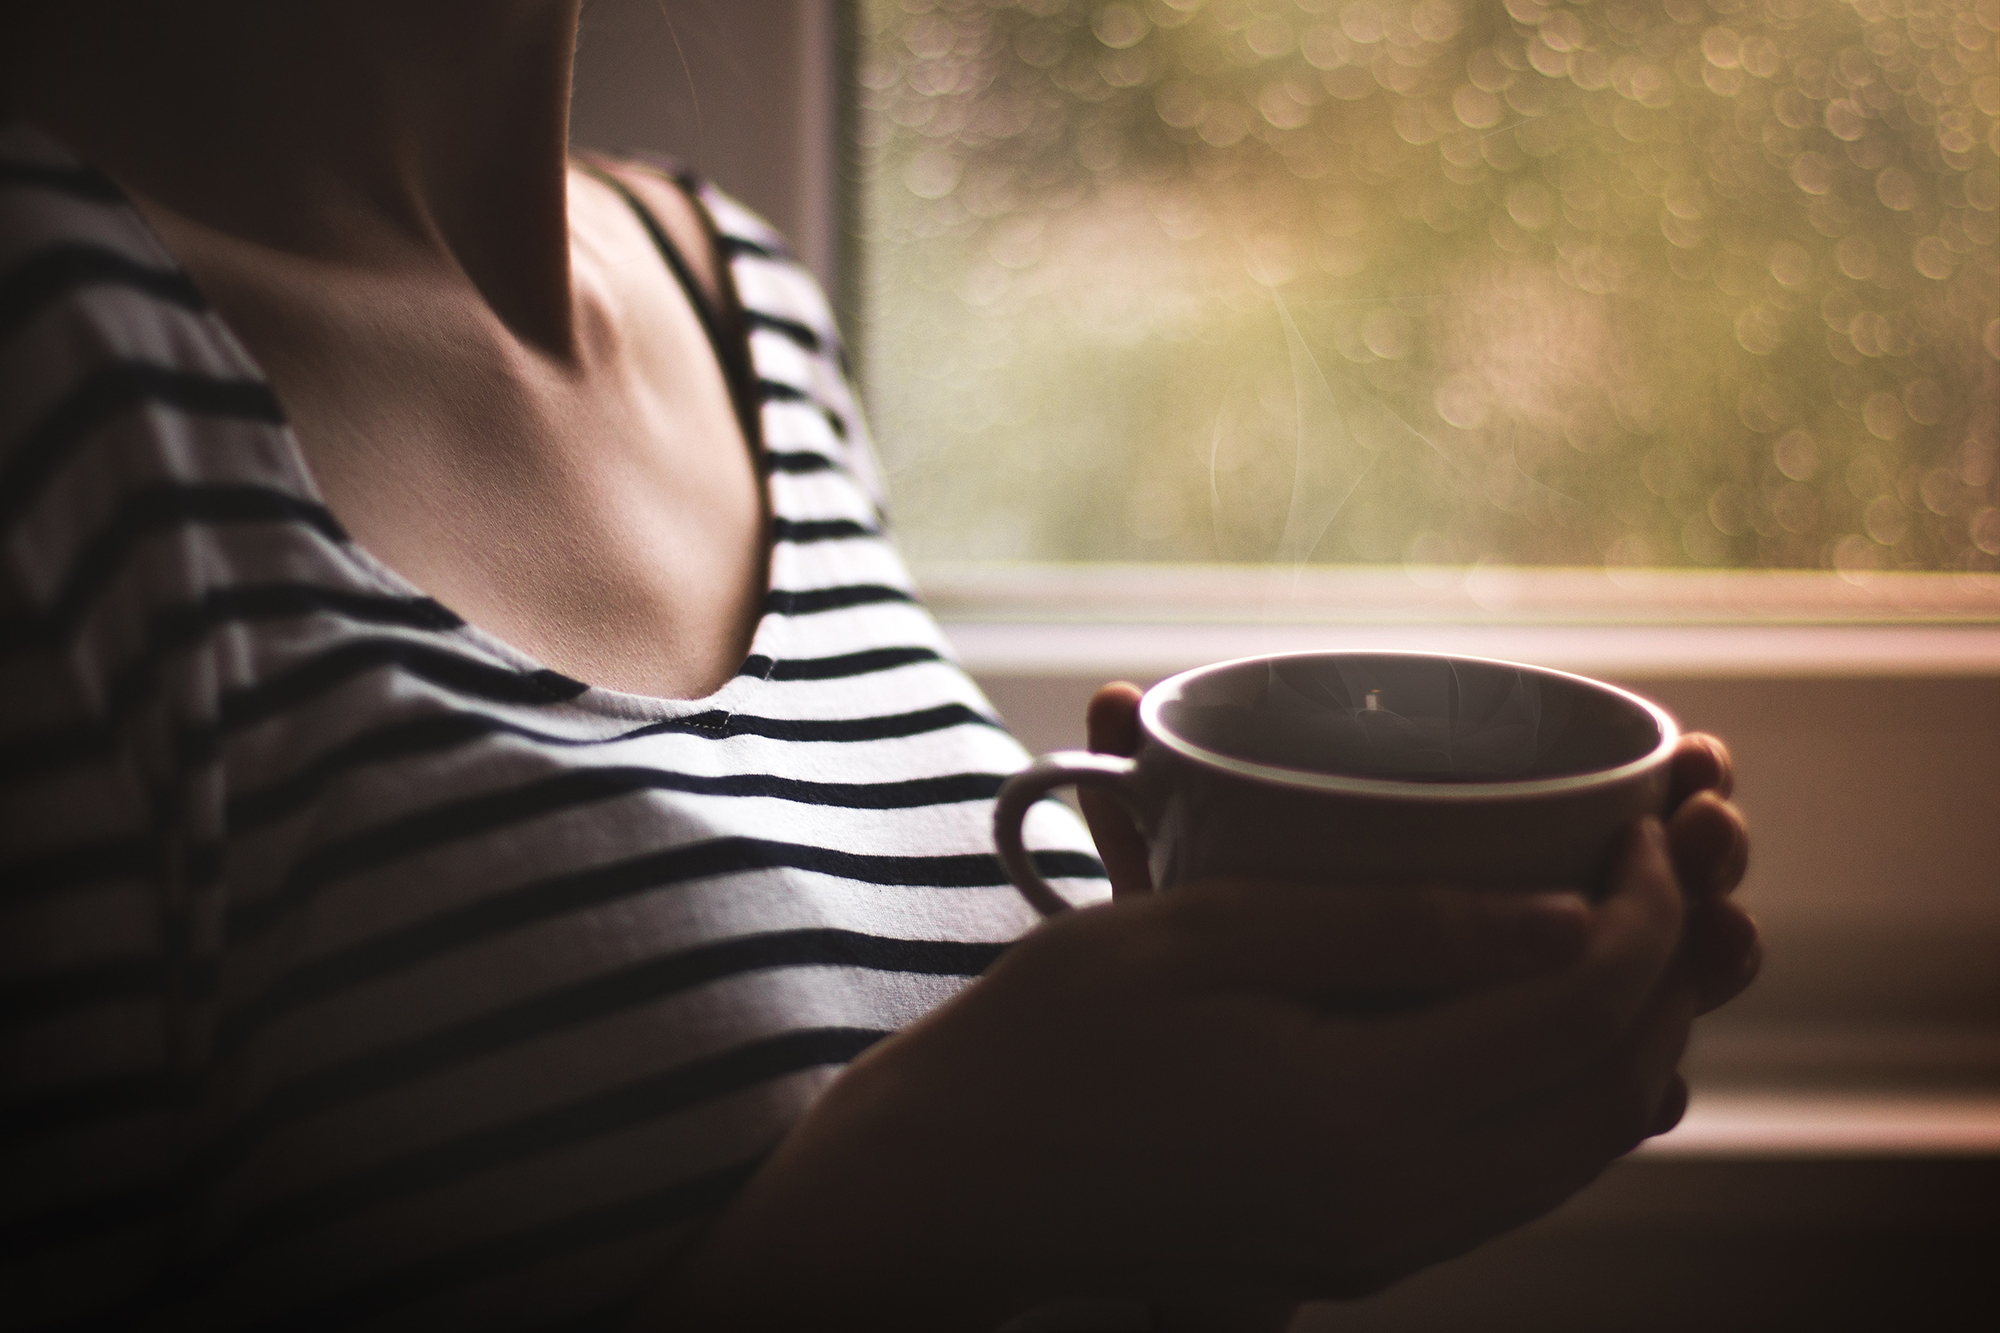 Woman holding a cup of tea looking out the window representing someone contemplating past childhood trauma and the need to address it through Therapy for Childhood Trauma Survivors in Ohio to move forward in life.